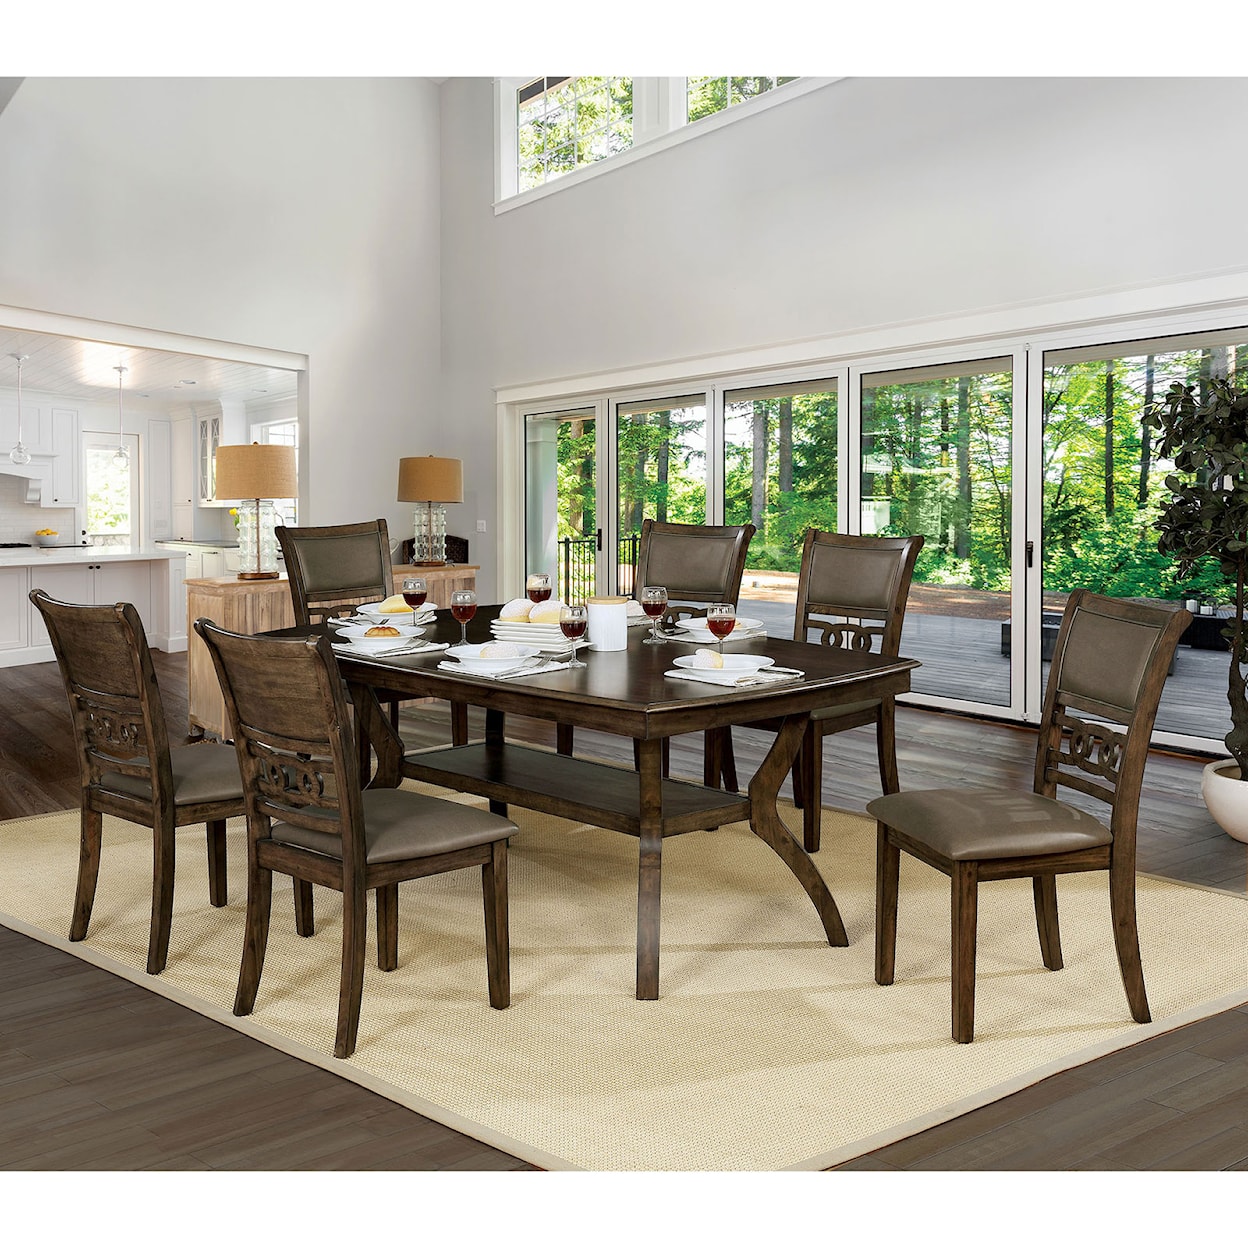 FUSA Holly 7 Pc. Dining Table Set